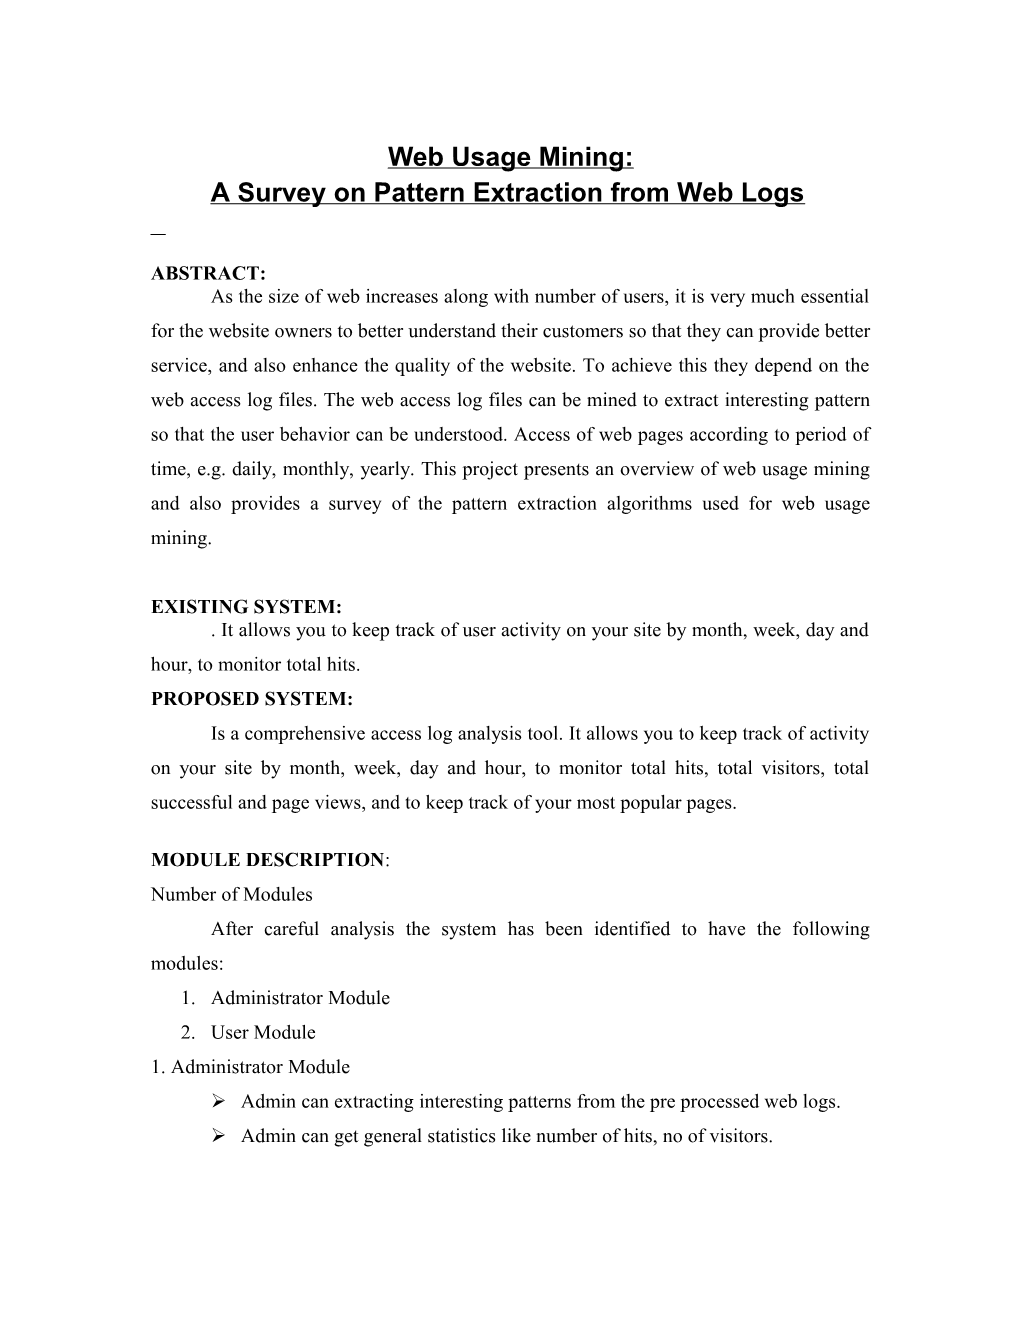 A Survey on Pattern Extraction from Web Logs